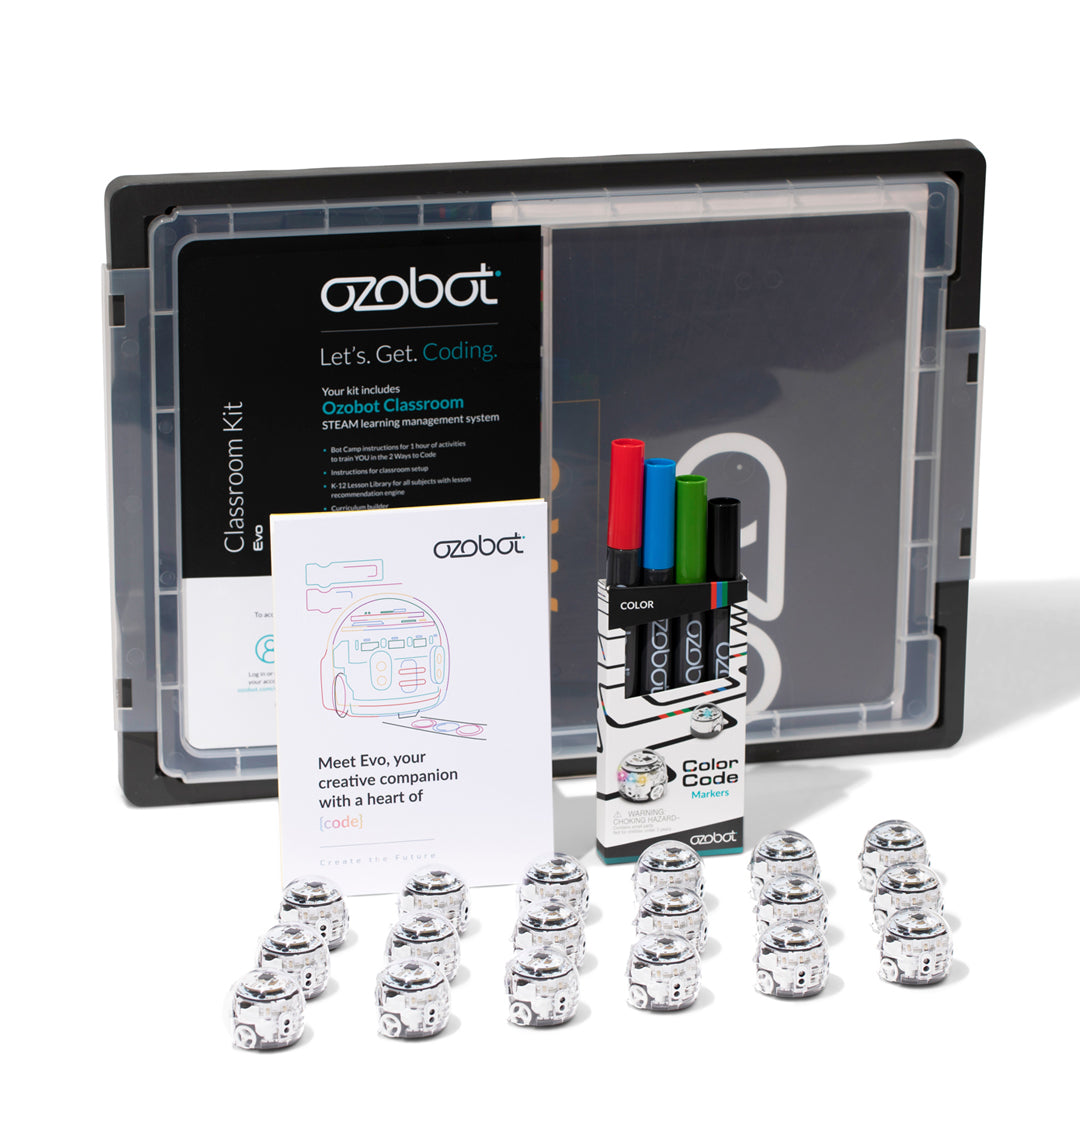 Ozobot Evo Classroom Kit (18 Bots) now available in Australia from Sammat Education